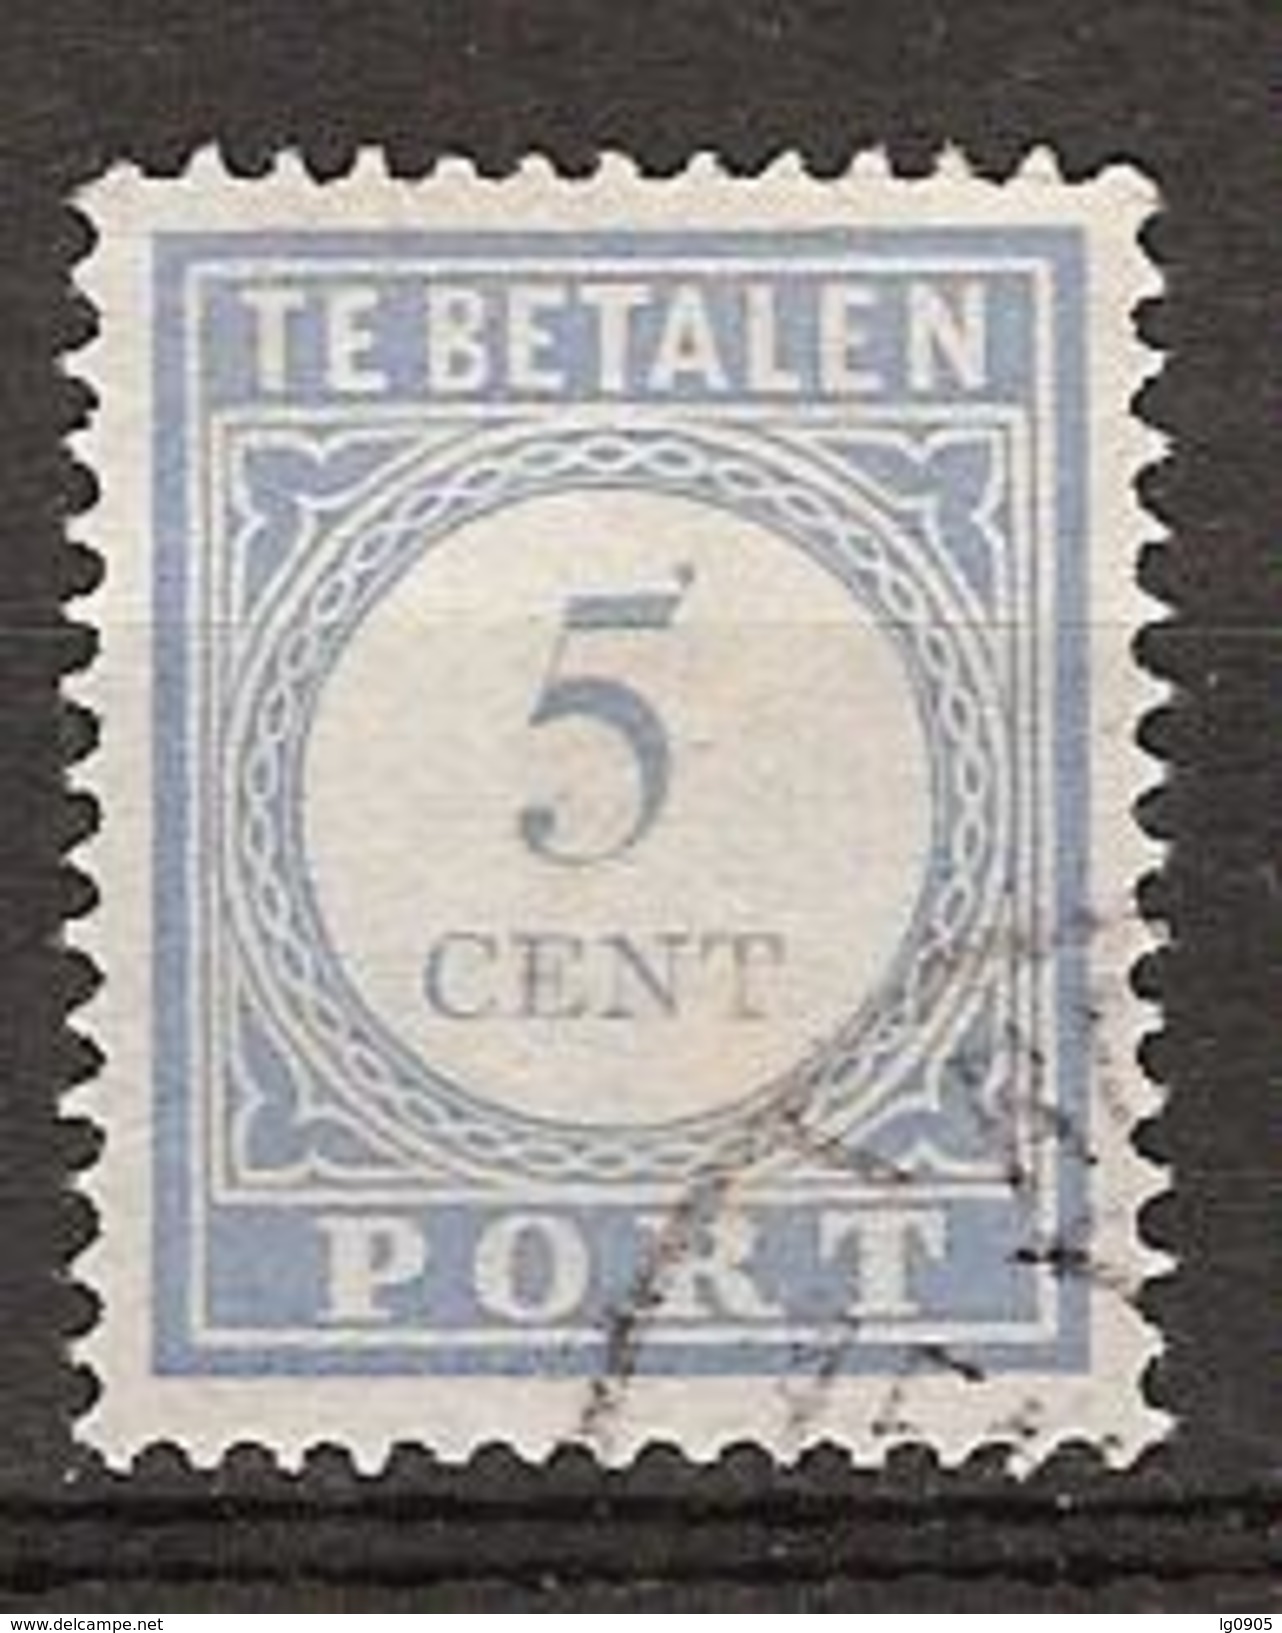 NVPH Nederland Netherlands Holanda Pays Bas Port 51 Used Timbre-taxe Postmarke Sellos De Correos NOW MANY DUE STAMPS - Strafportzegels